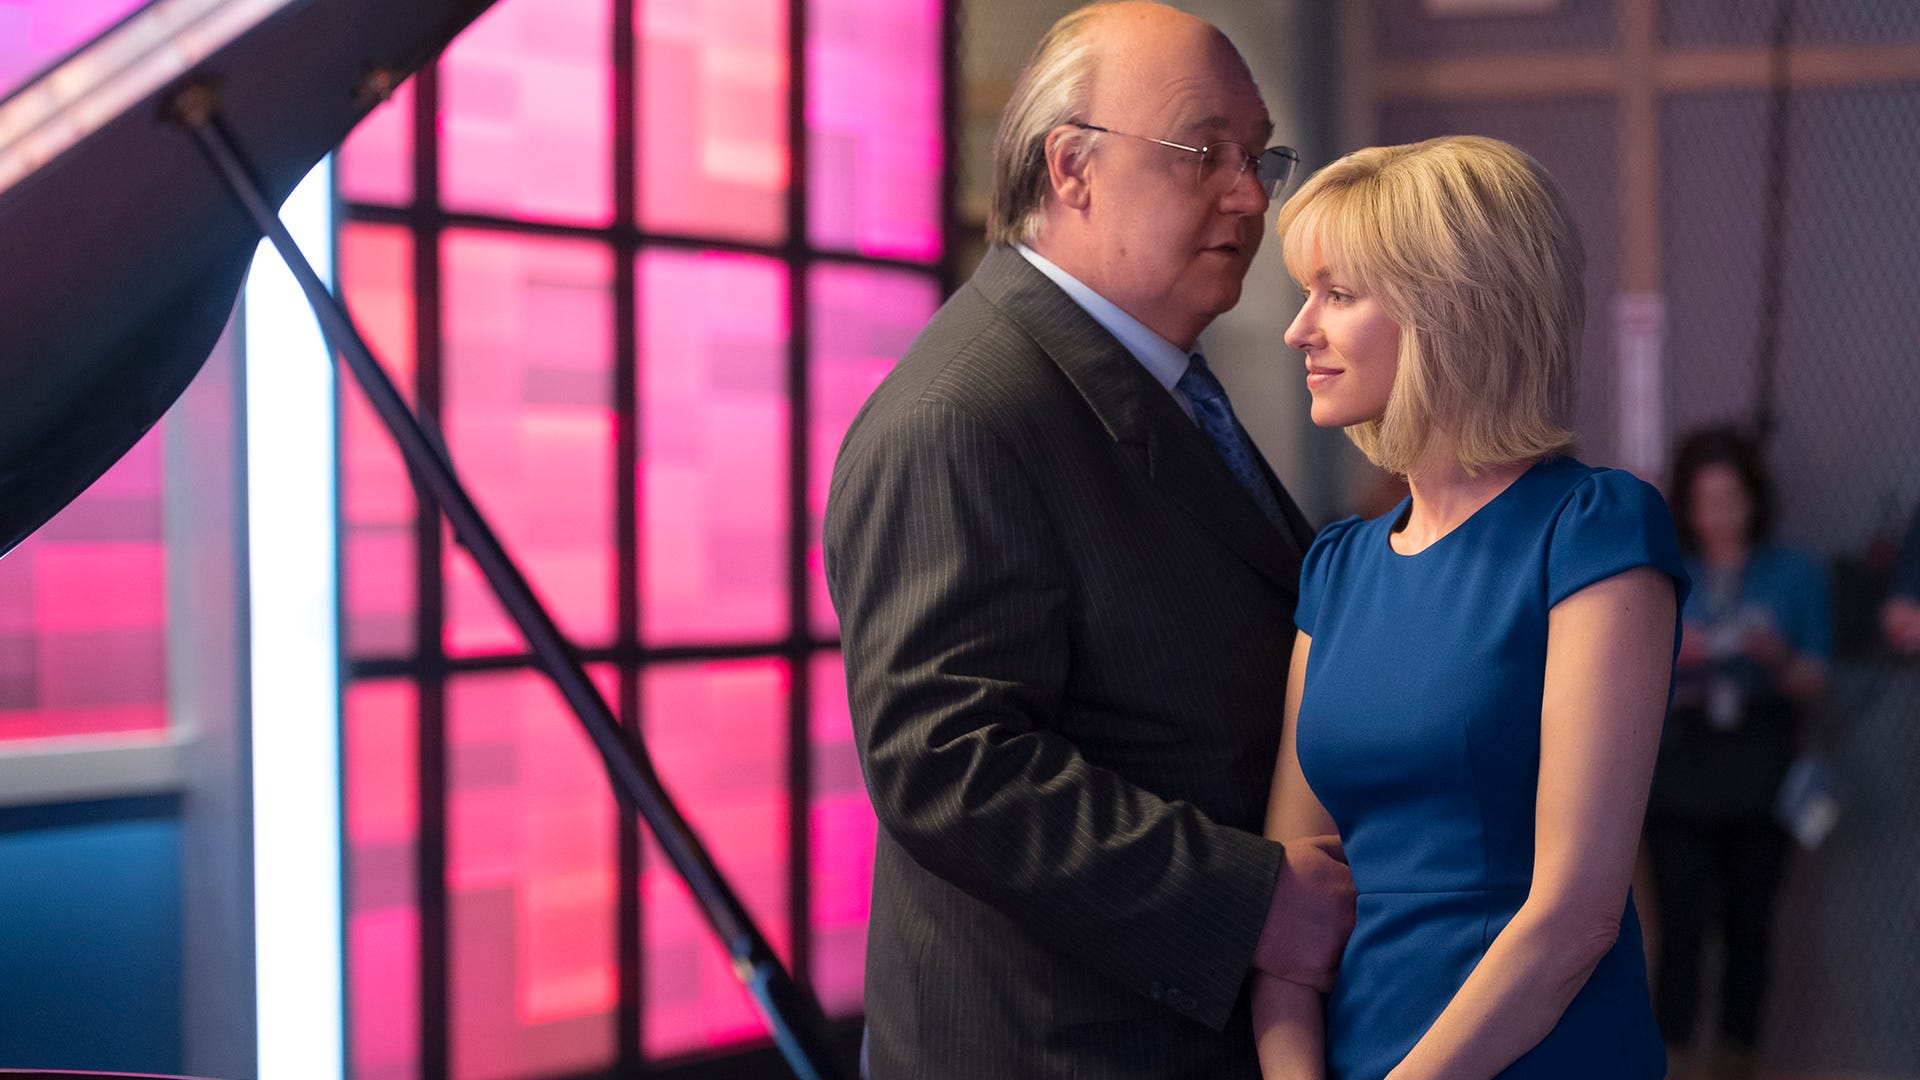 Russell Crowe as Roger Ailes and Naomi Watts as Gretchen Carlson in The Loudest Voice​